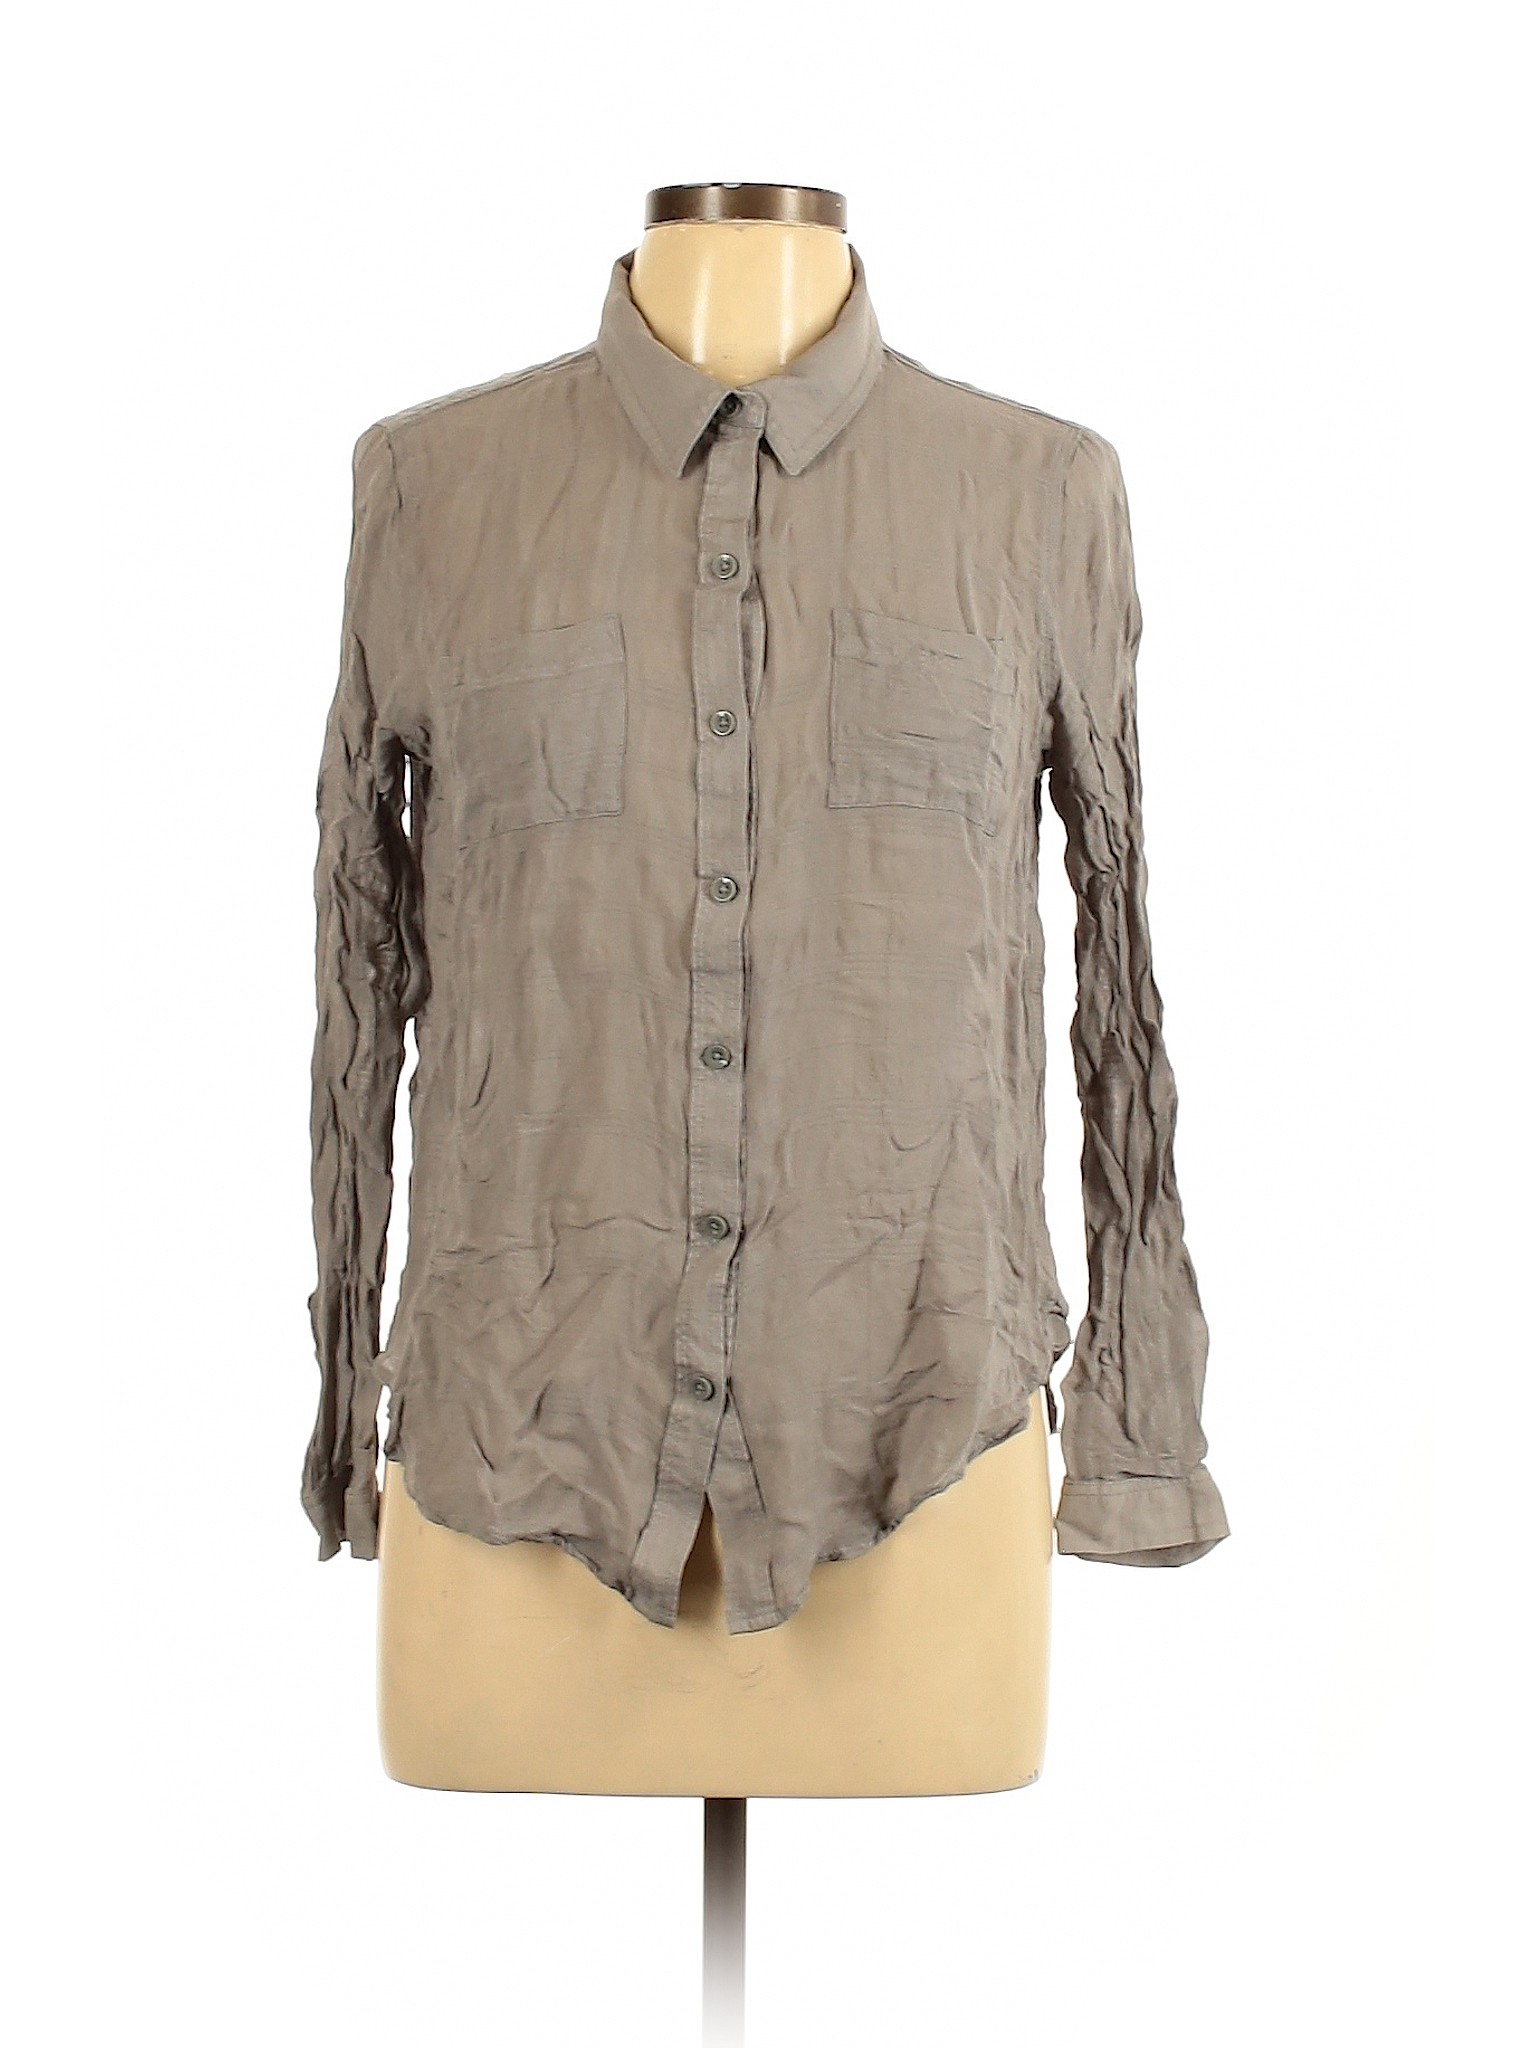 Forever 21 Contemporary Women Brown Long Sleeve Button-Down Shirt L | eBay